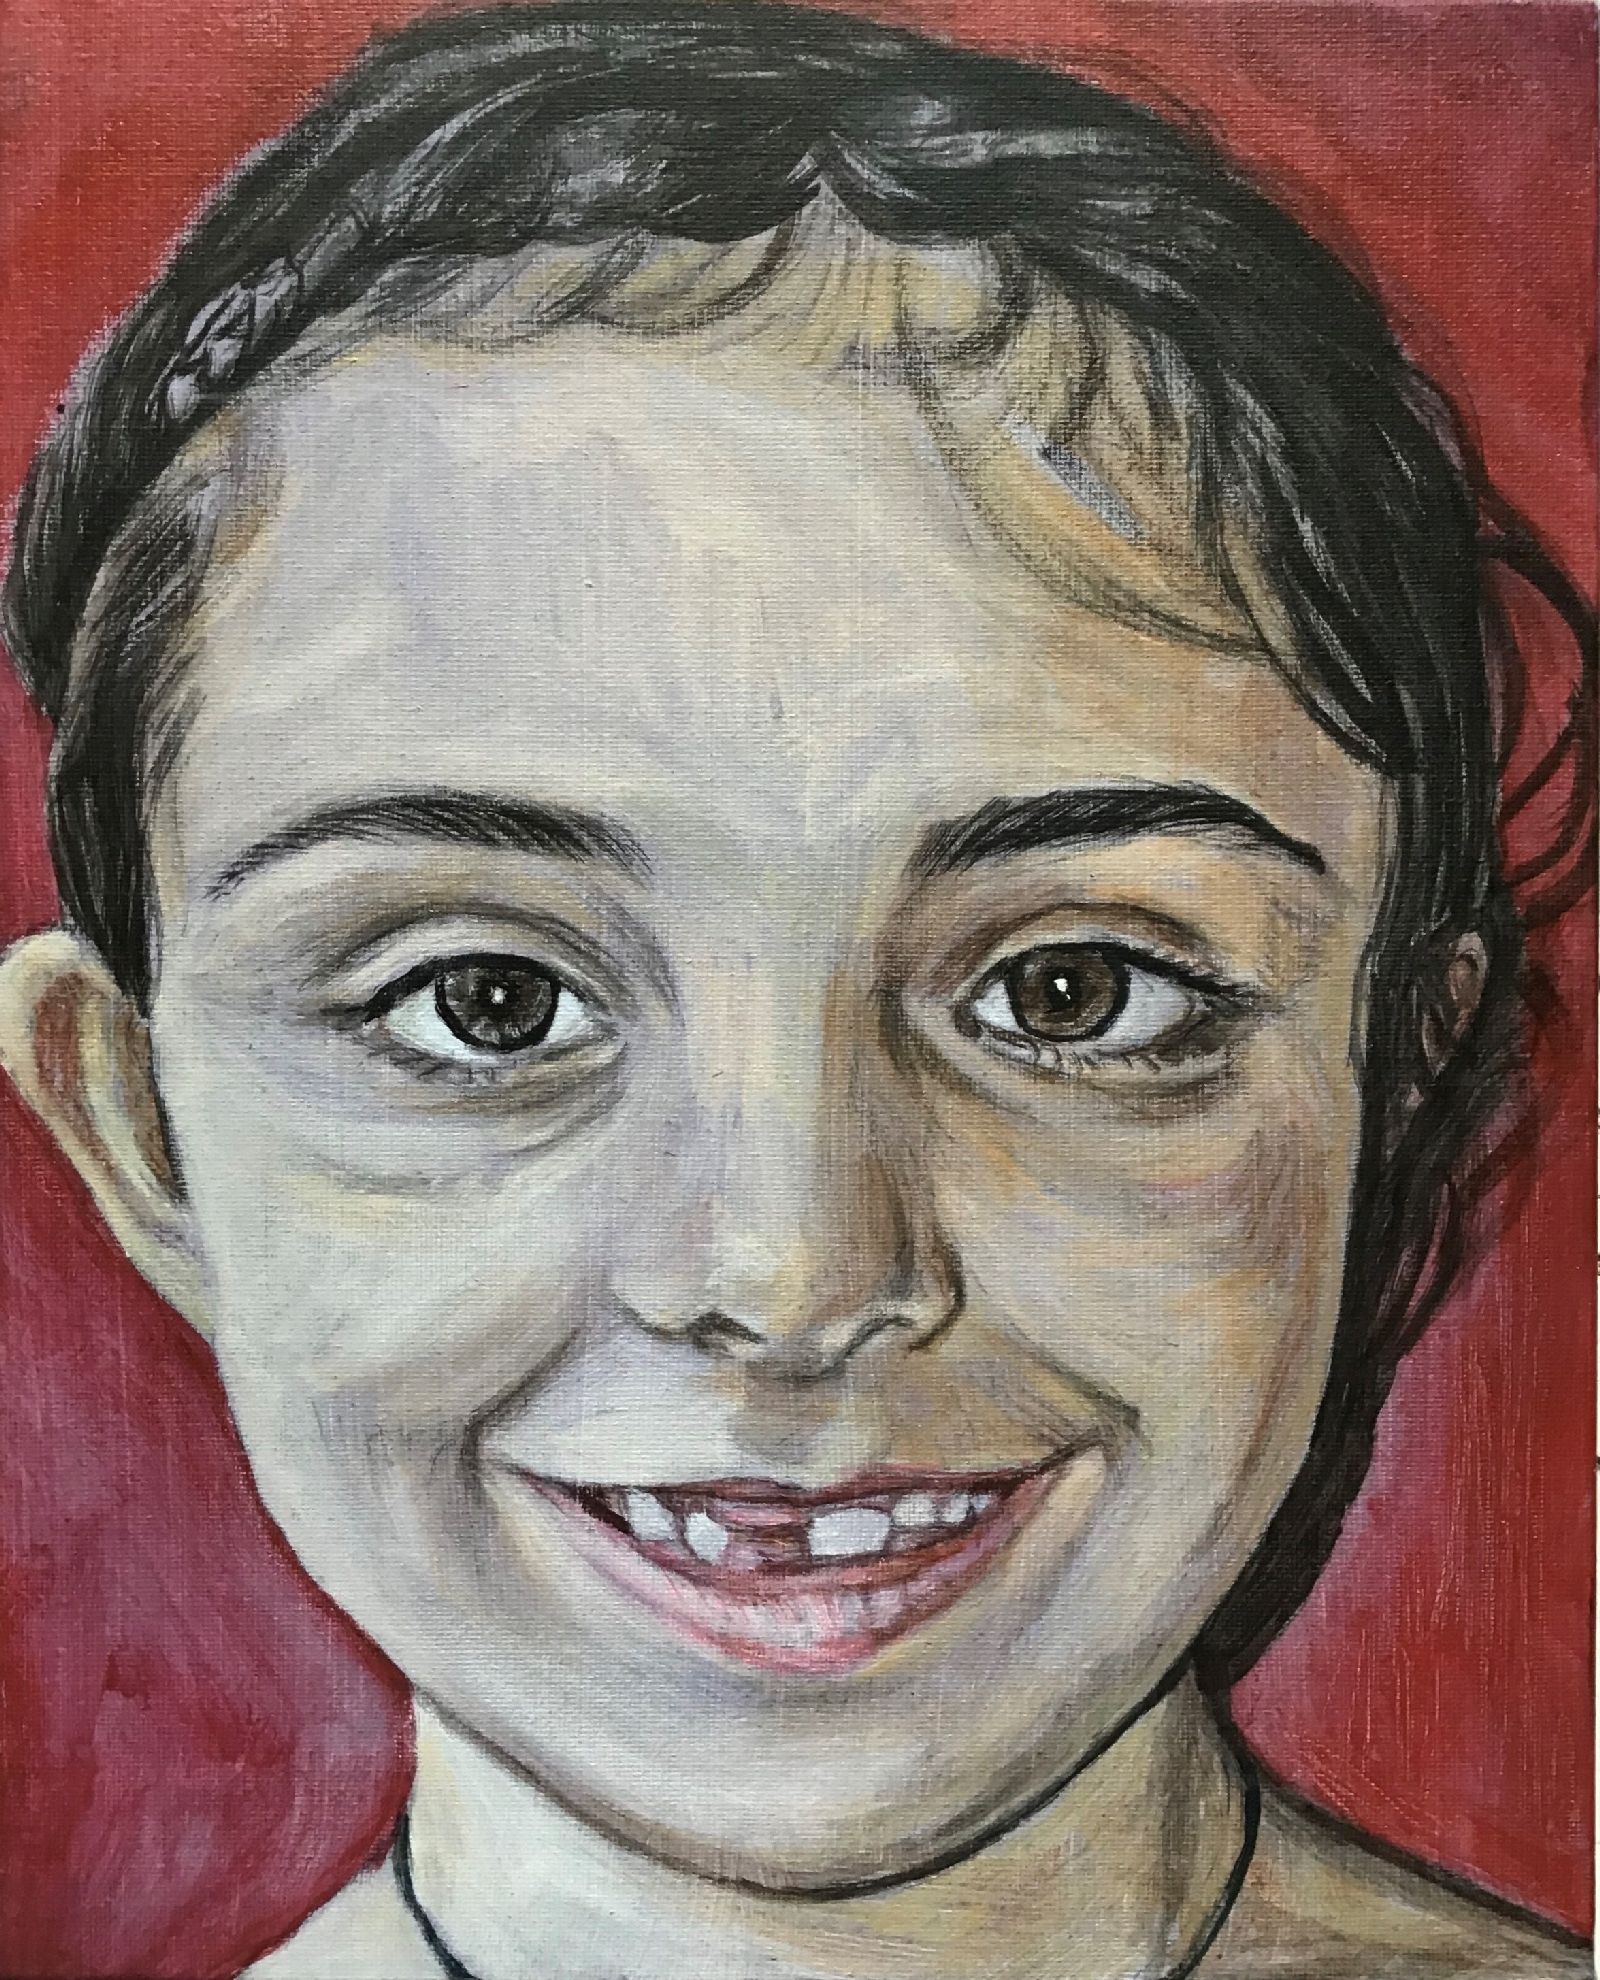 Girl with front tooth missing by Christopher Banahan